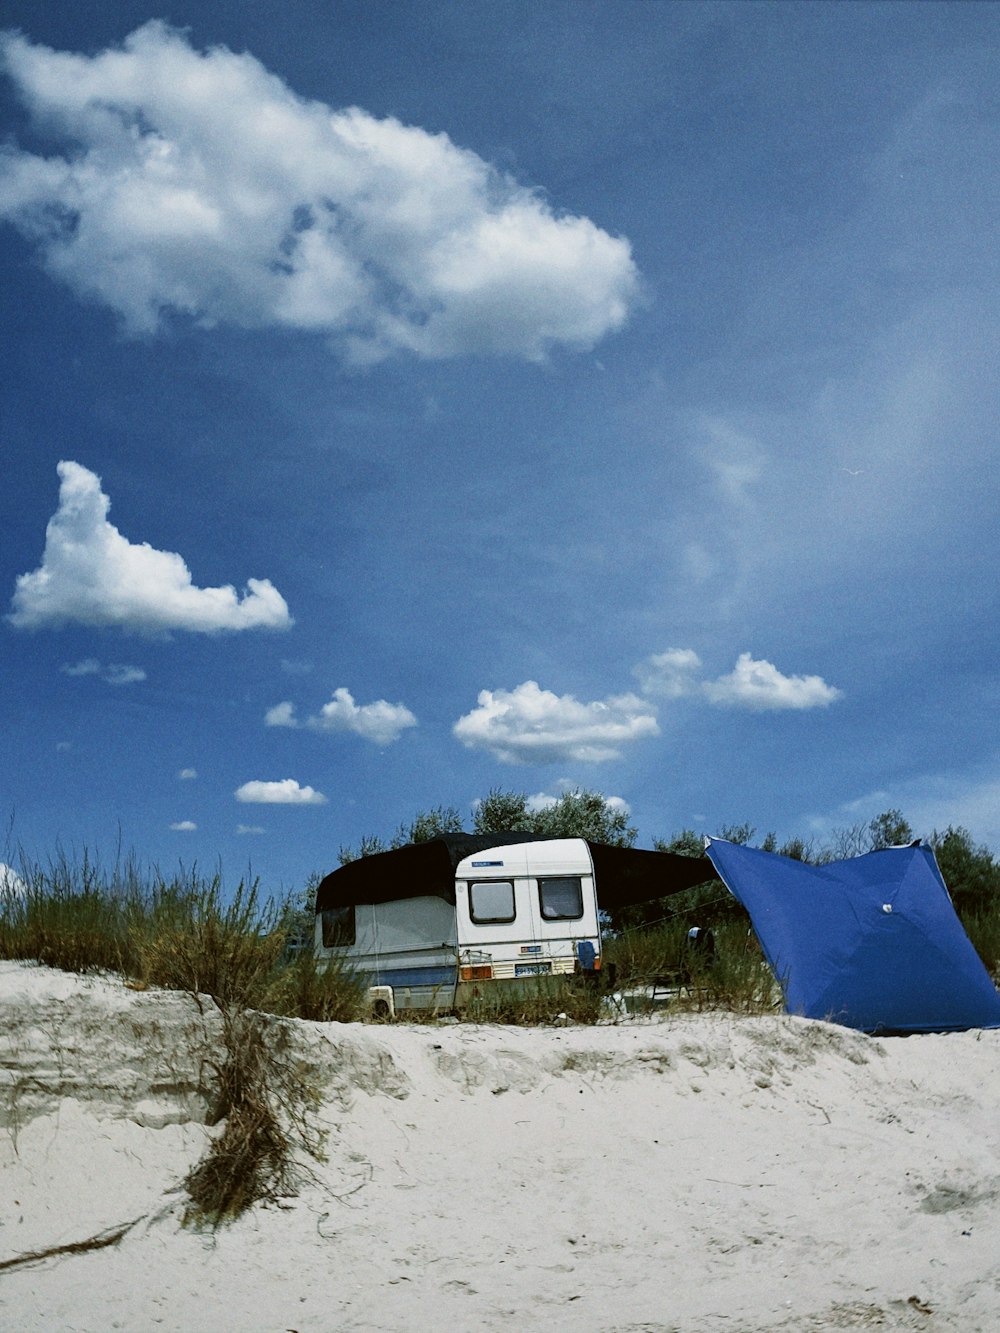 a camper is parked on the beach with a blue tarp